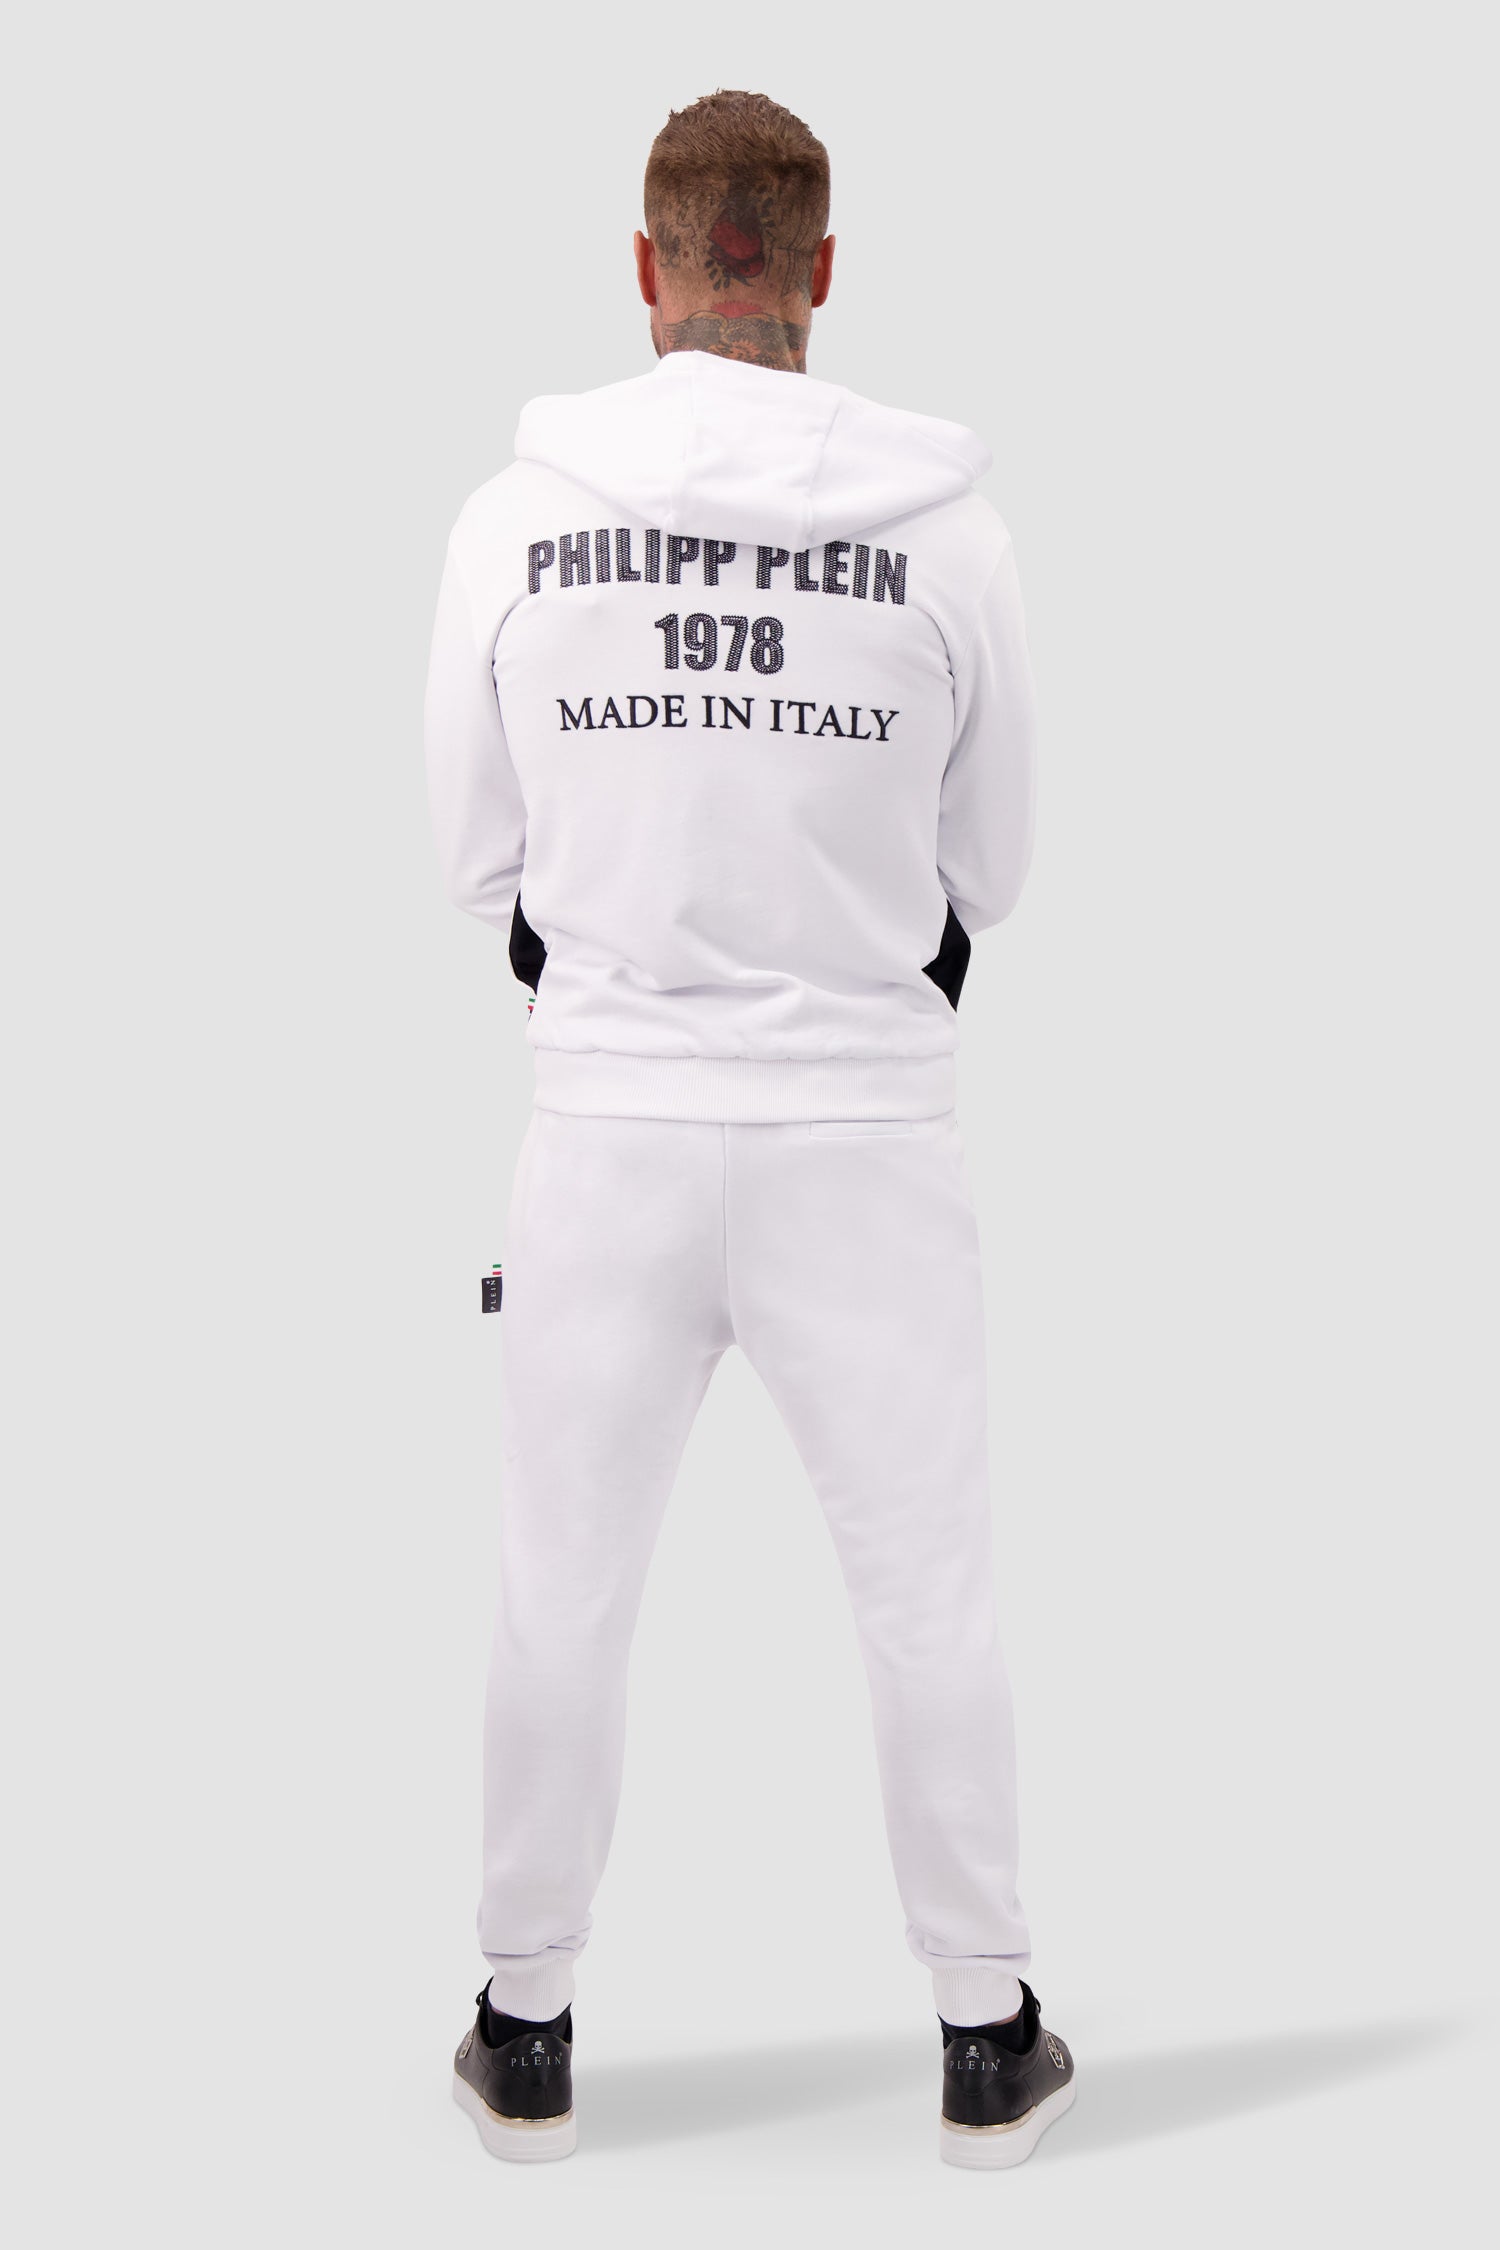 Jogging Tracksuit Top/Trousers PP1978